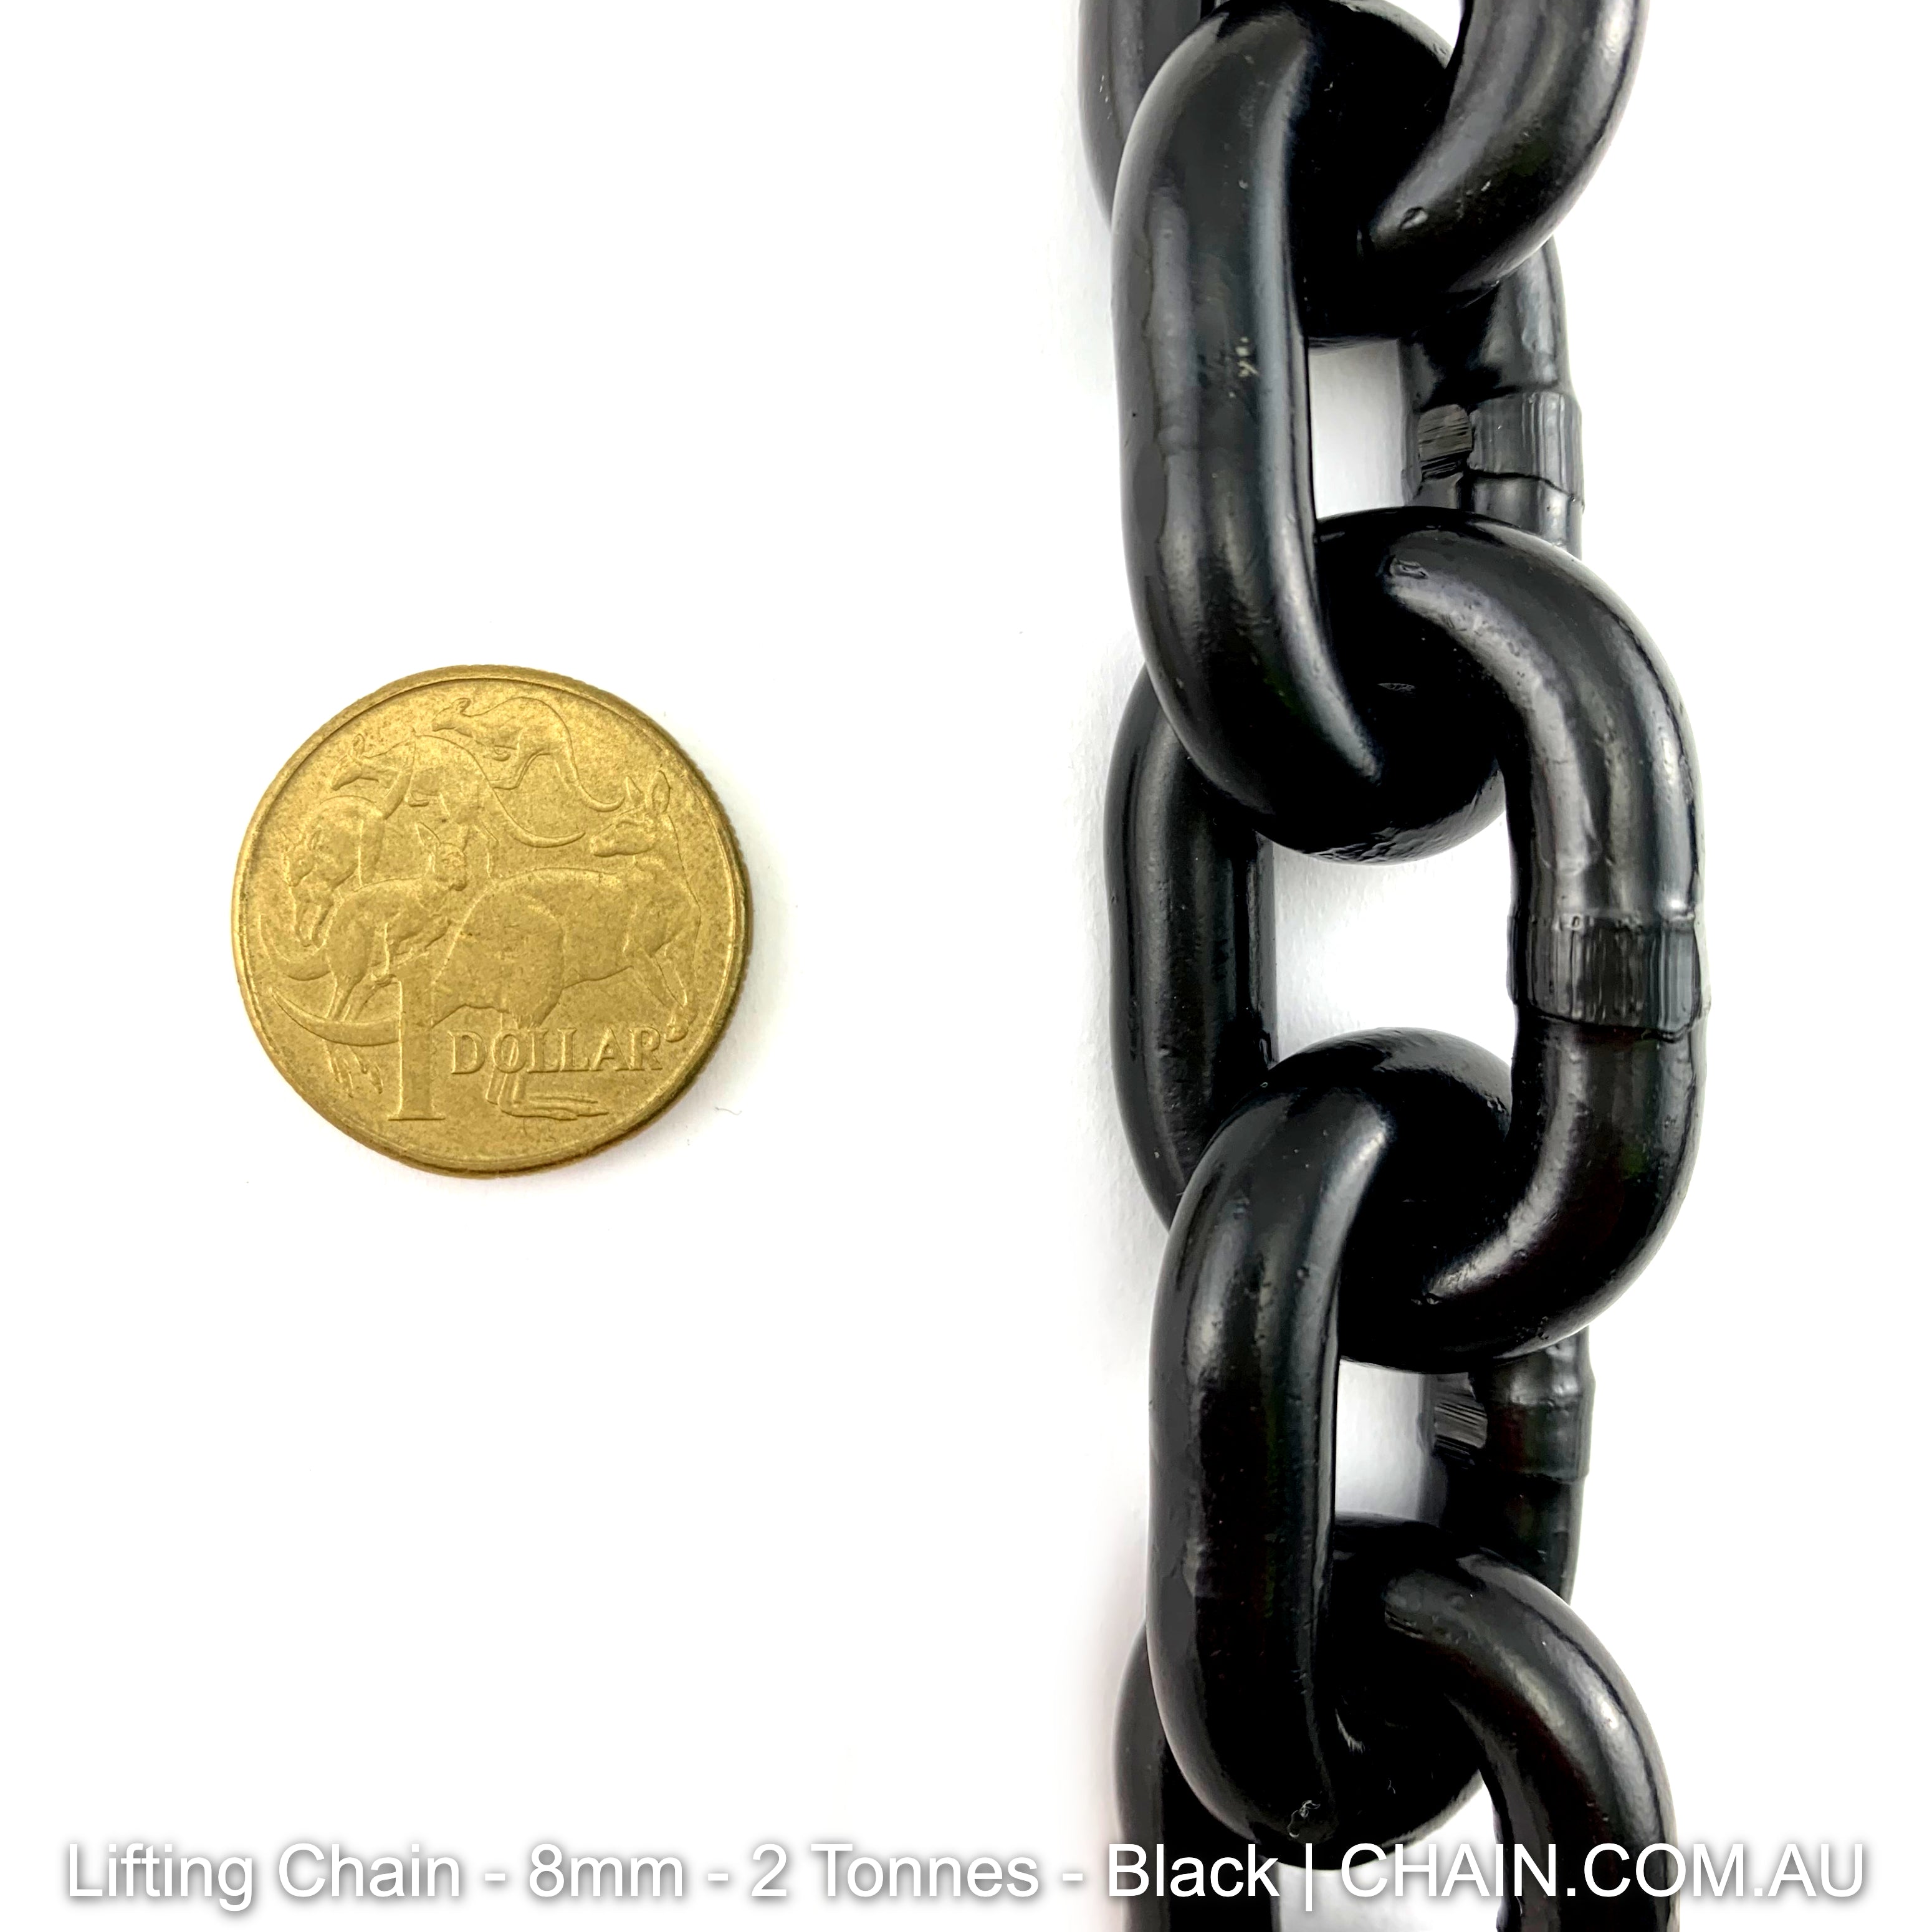 Lifting Chain - Black Steel - size: 8mm - Tested & Rated to 2 tonnes. Shop chain online at chain.com.au. Australia wide shipping.